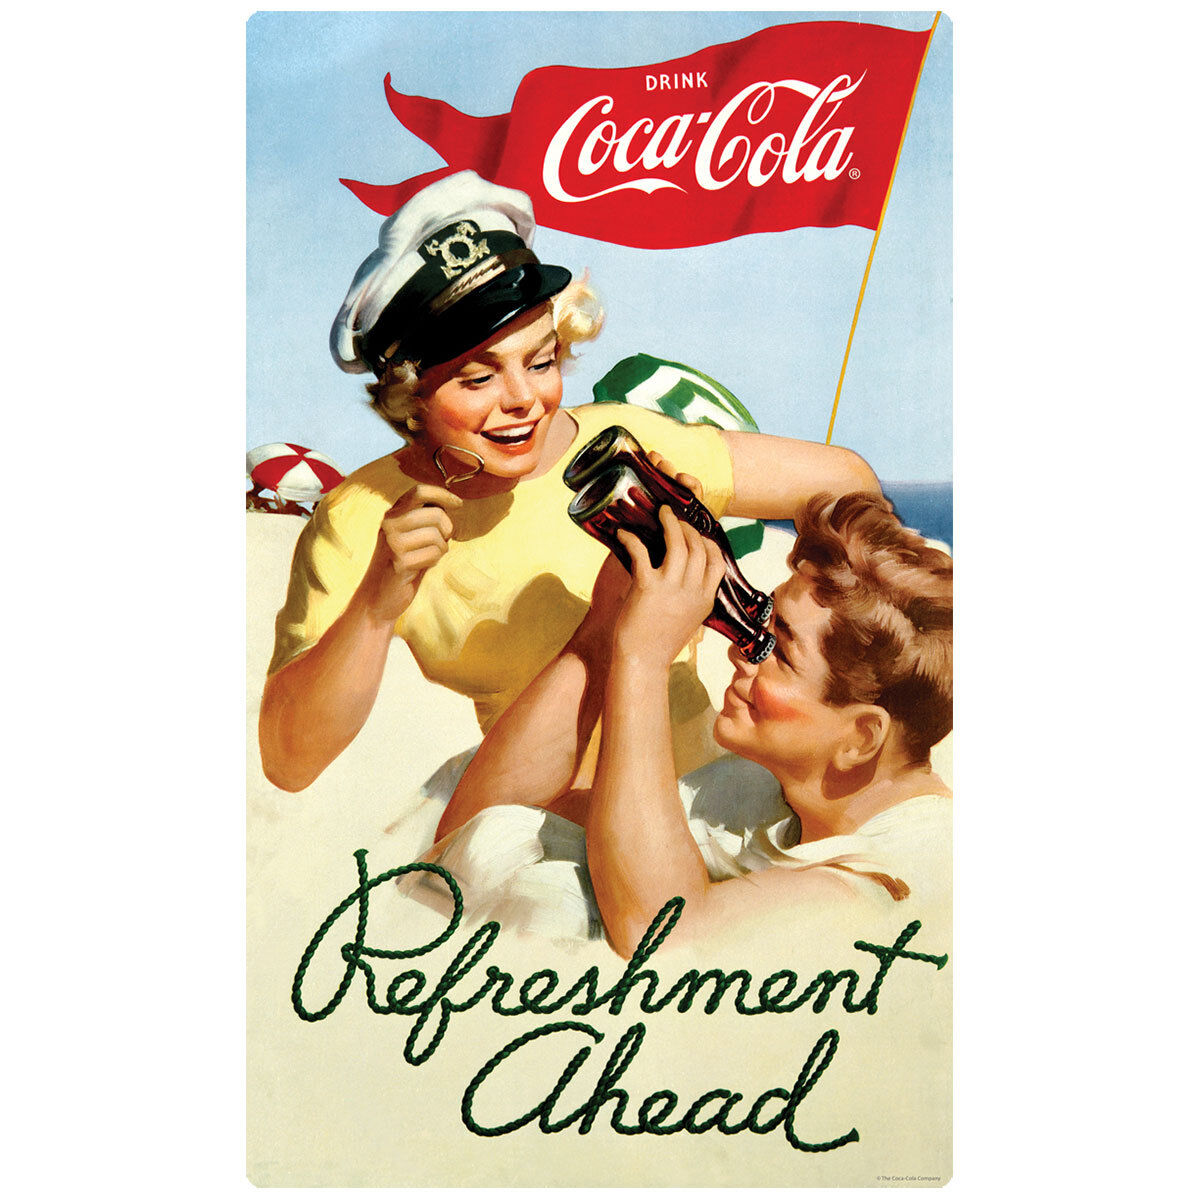 Coca-Cola Boating Refreshment Ahead 50s Wall Decal Officially Licensed Made USA